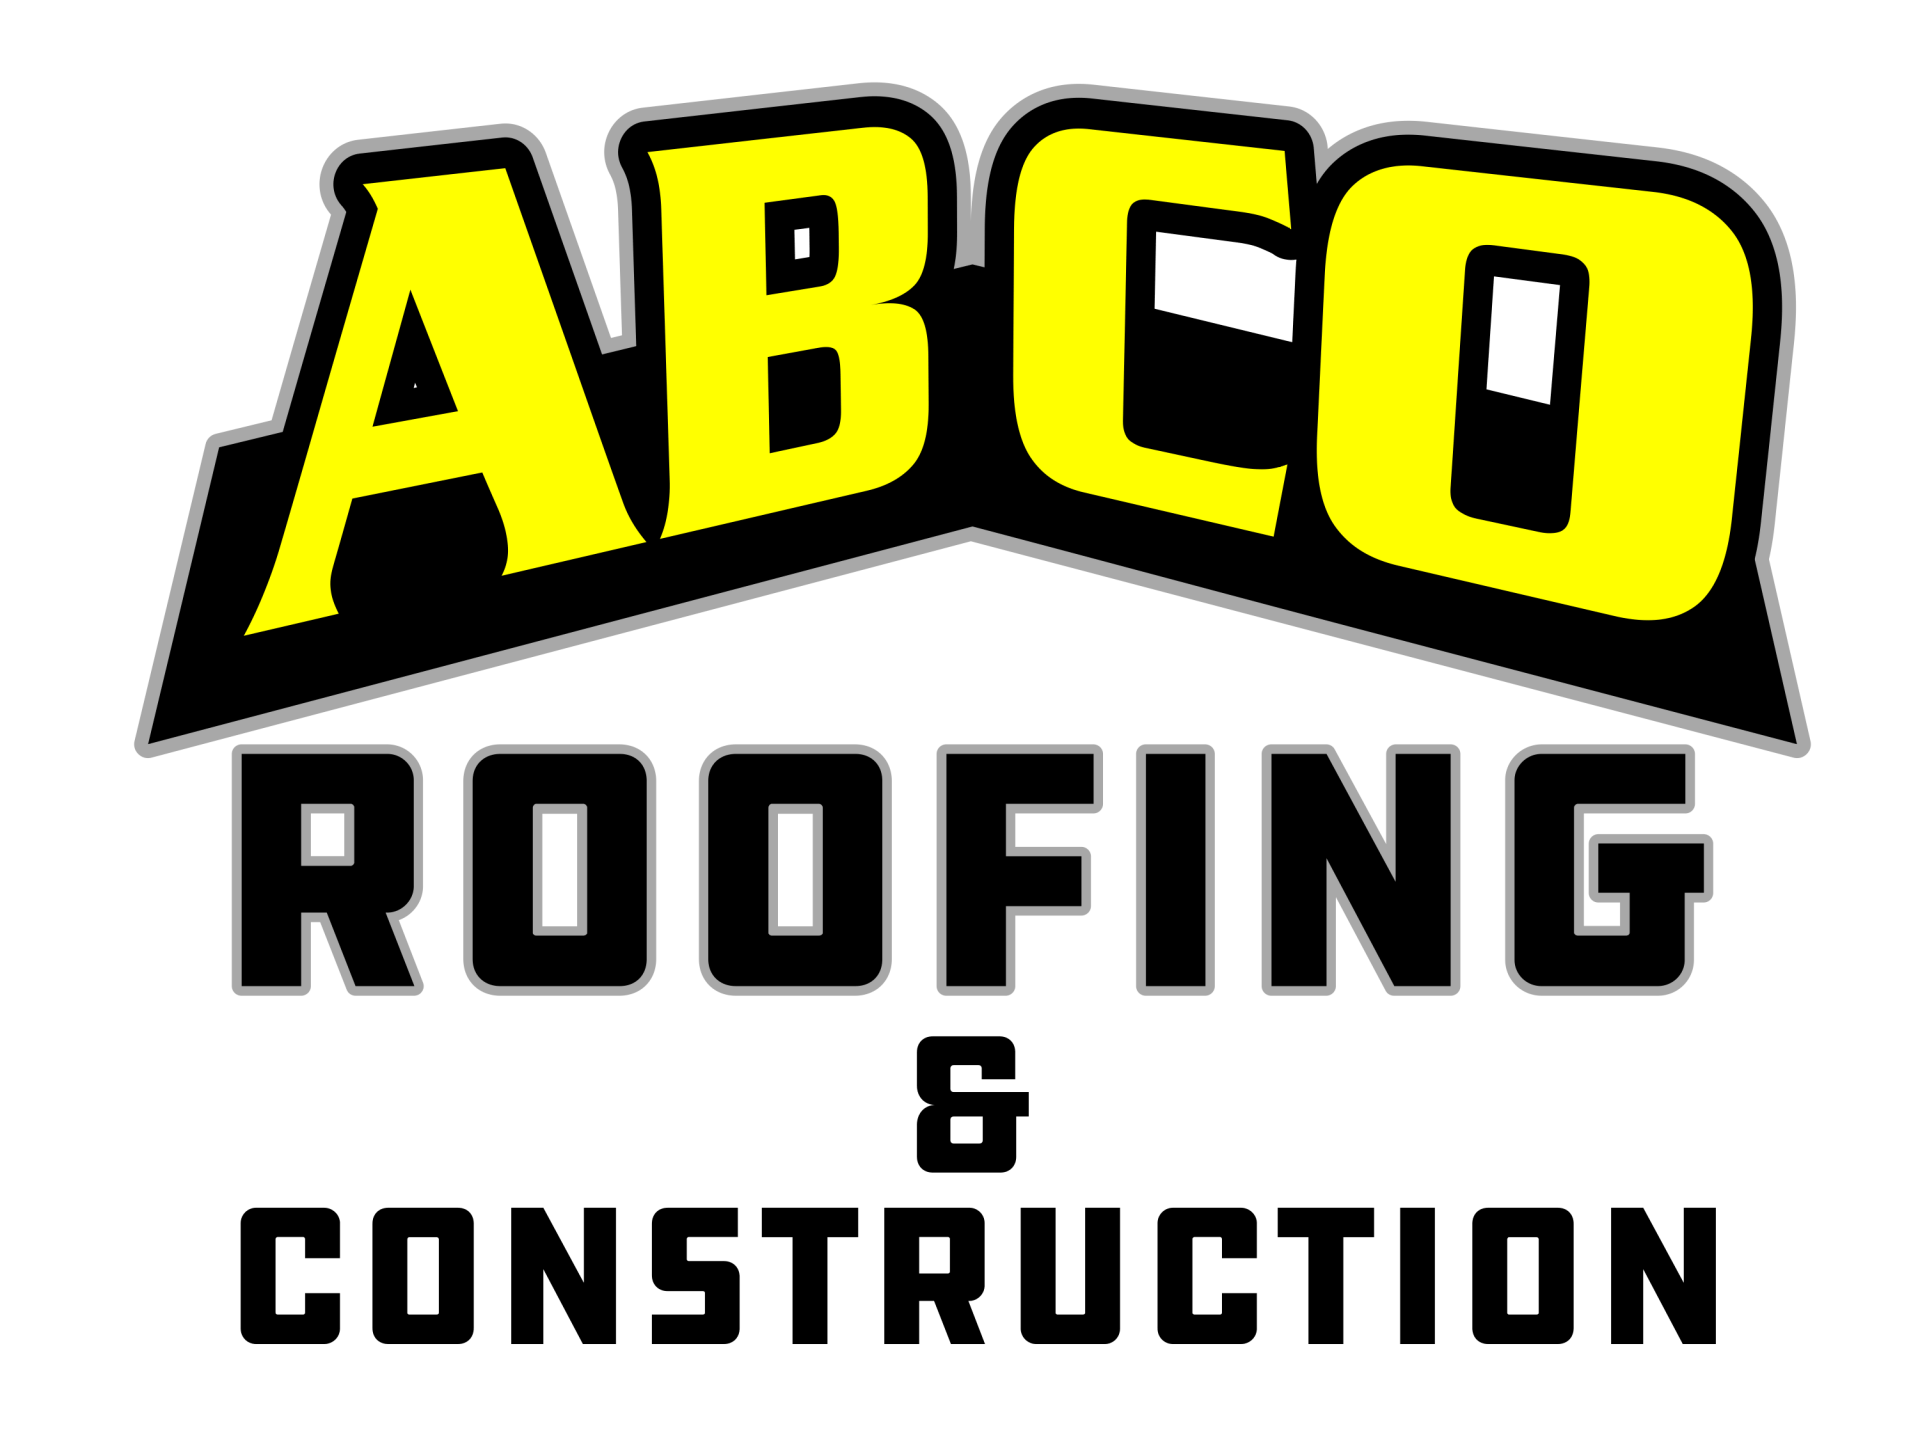 Top Roofing Services in Beaumont